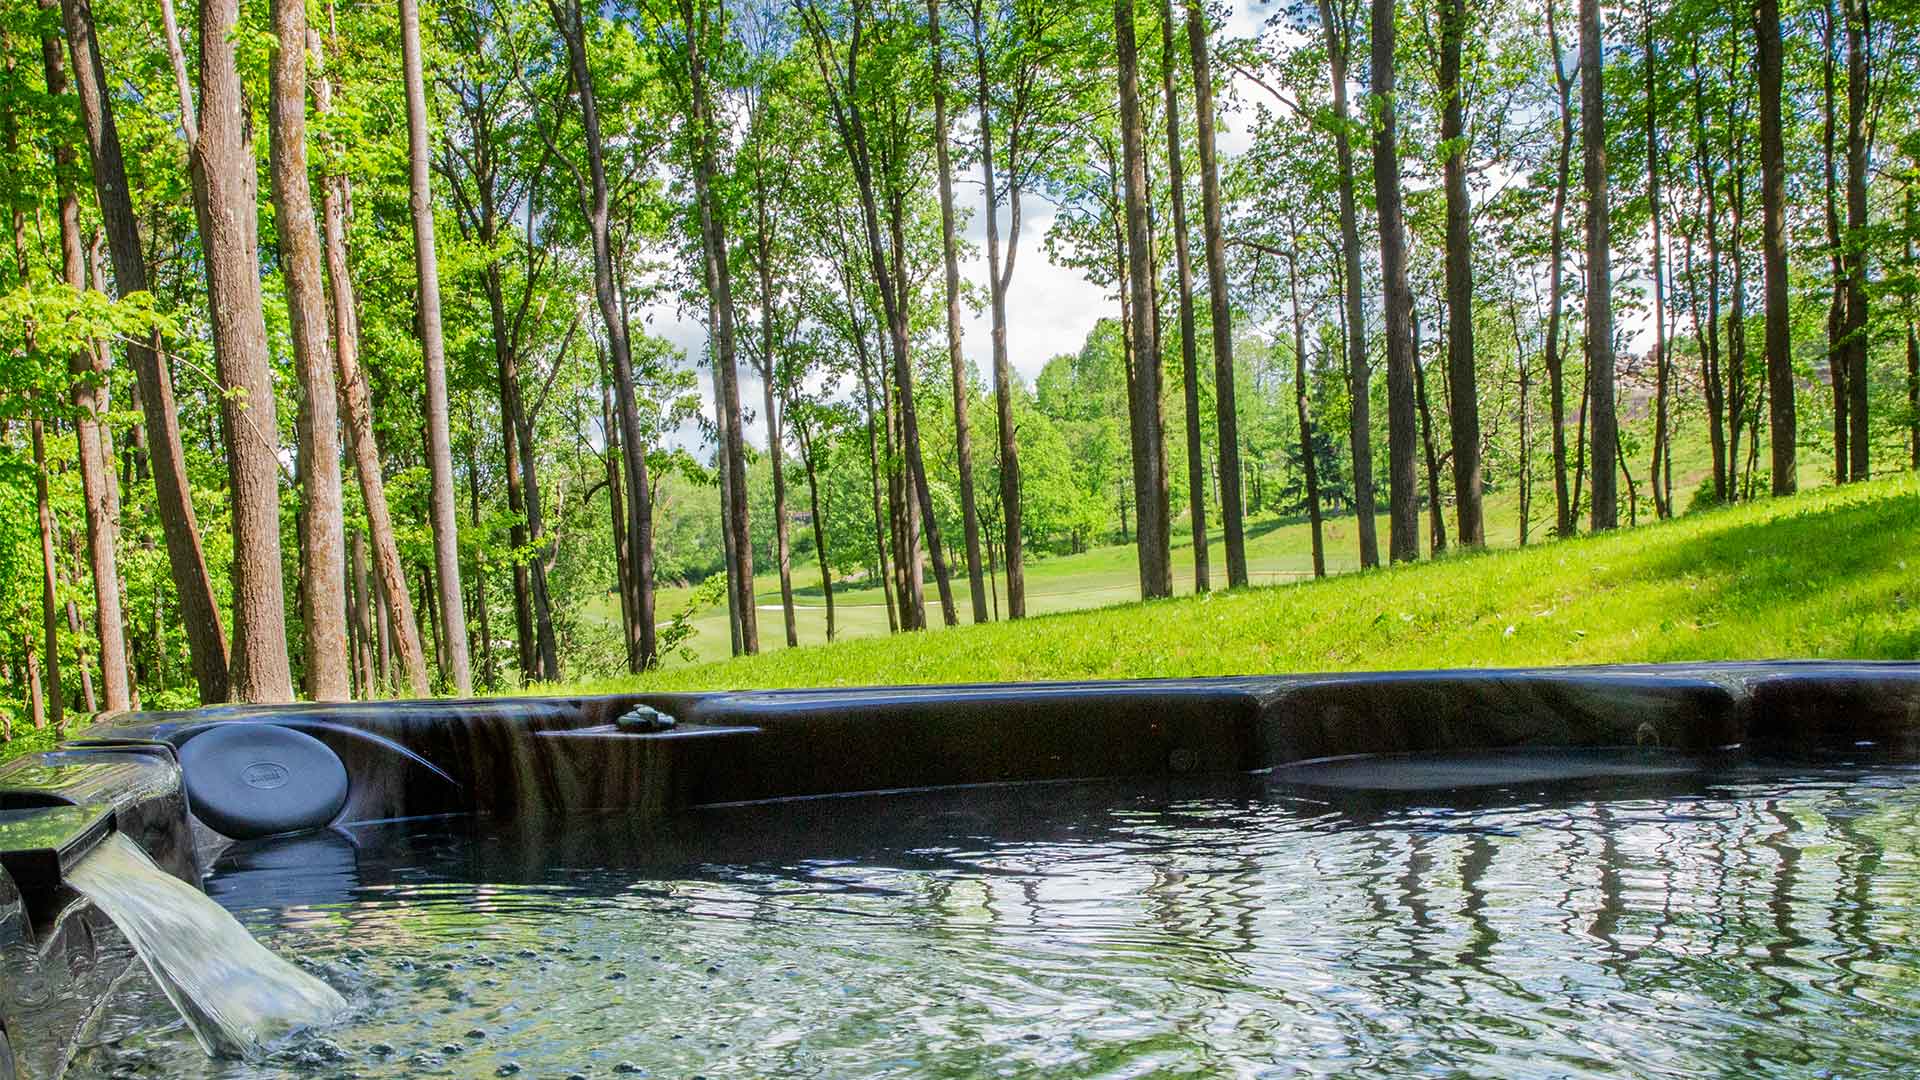 detail shot of a hot tub with lush green grass and trees in the background